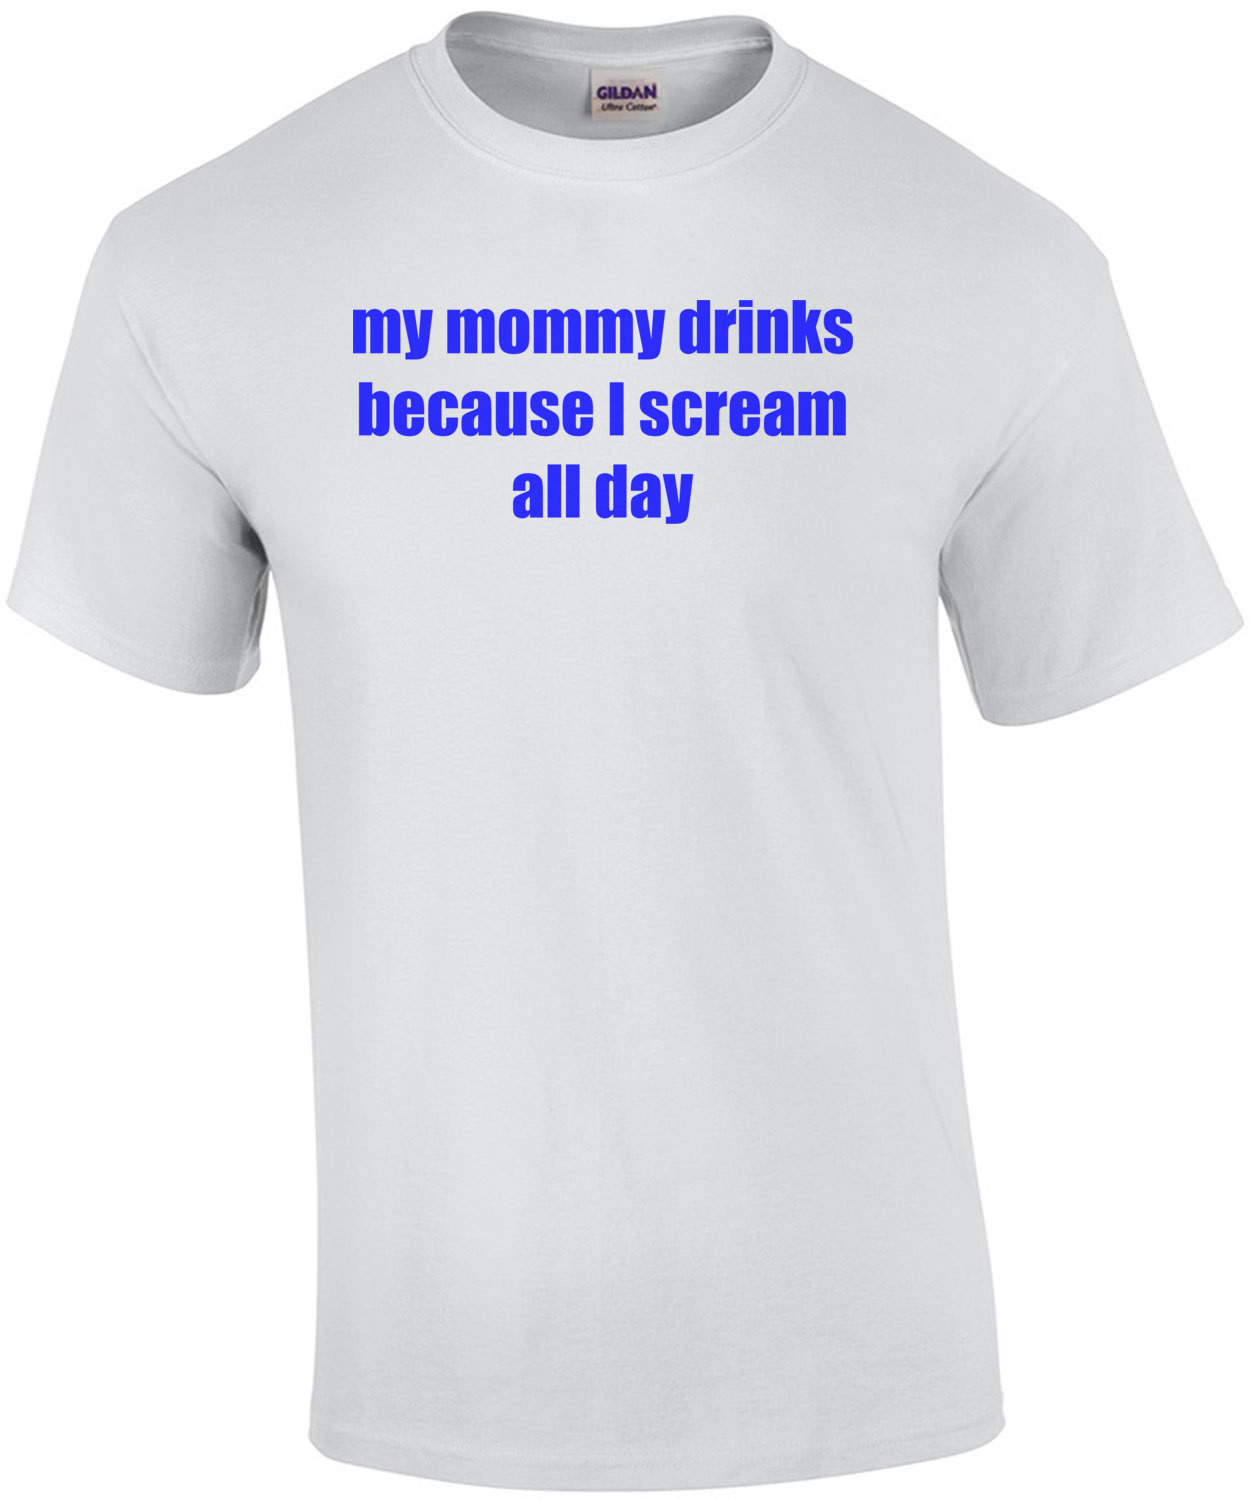 My Mommy Drinks Because I Scream All Day Shirt